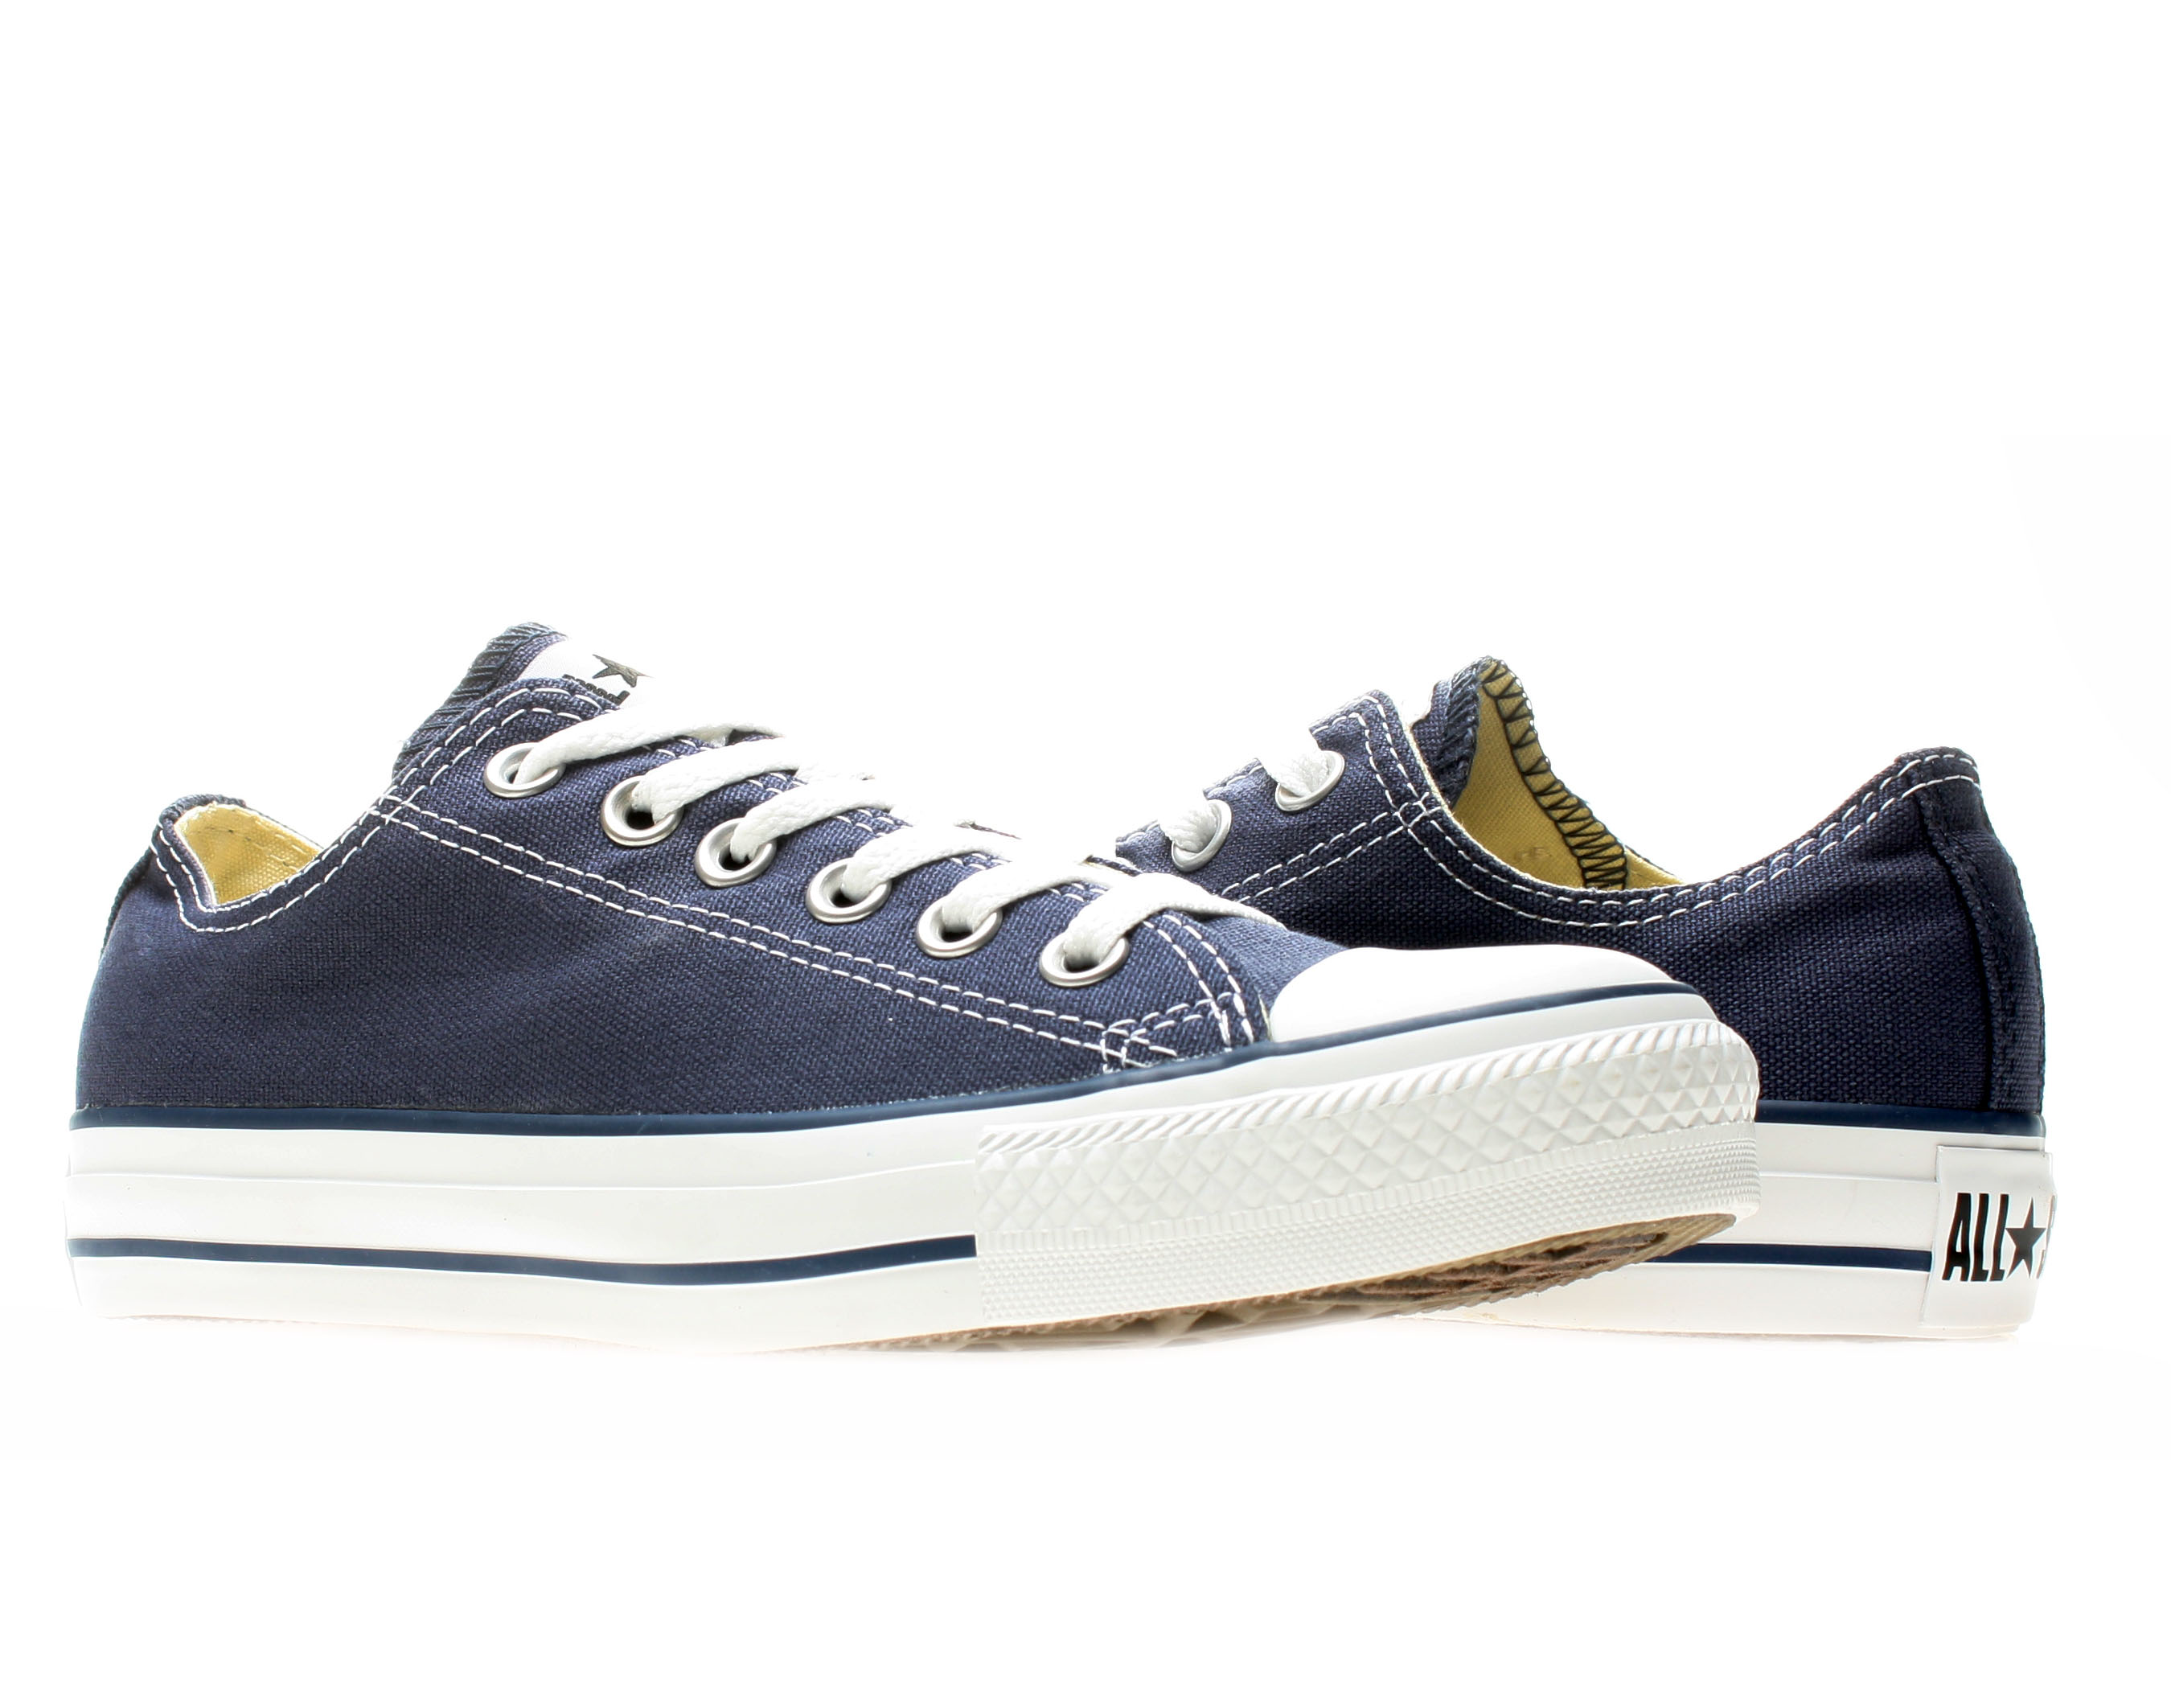 CONVERSE ALL STAR CHUCK TAYLOR LOW MEN'S NAVY M9697 - image 1 of 6